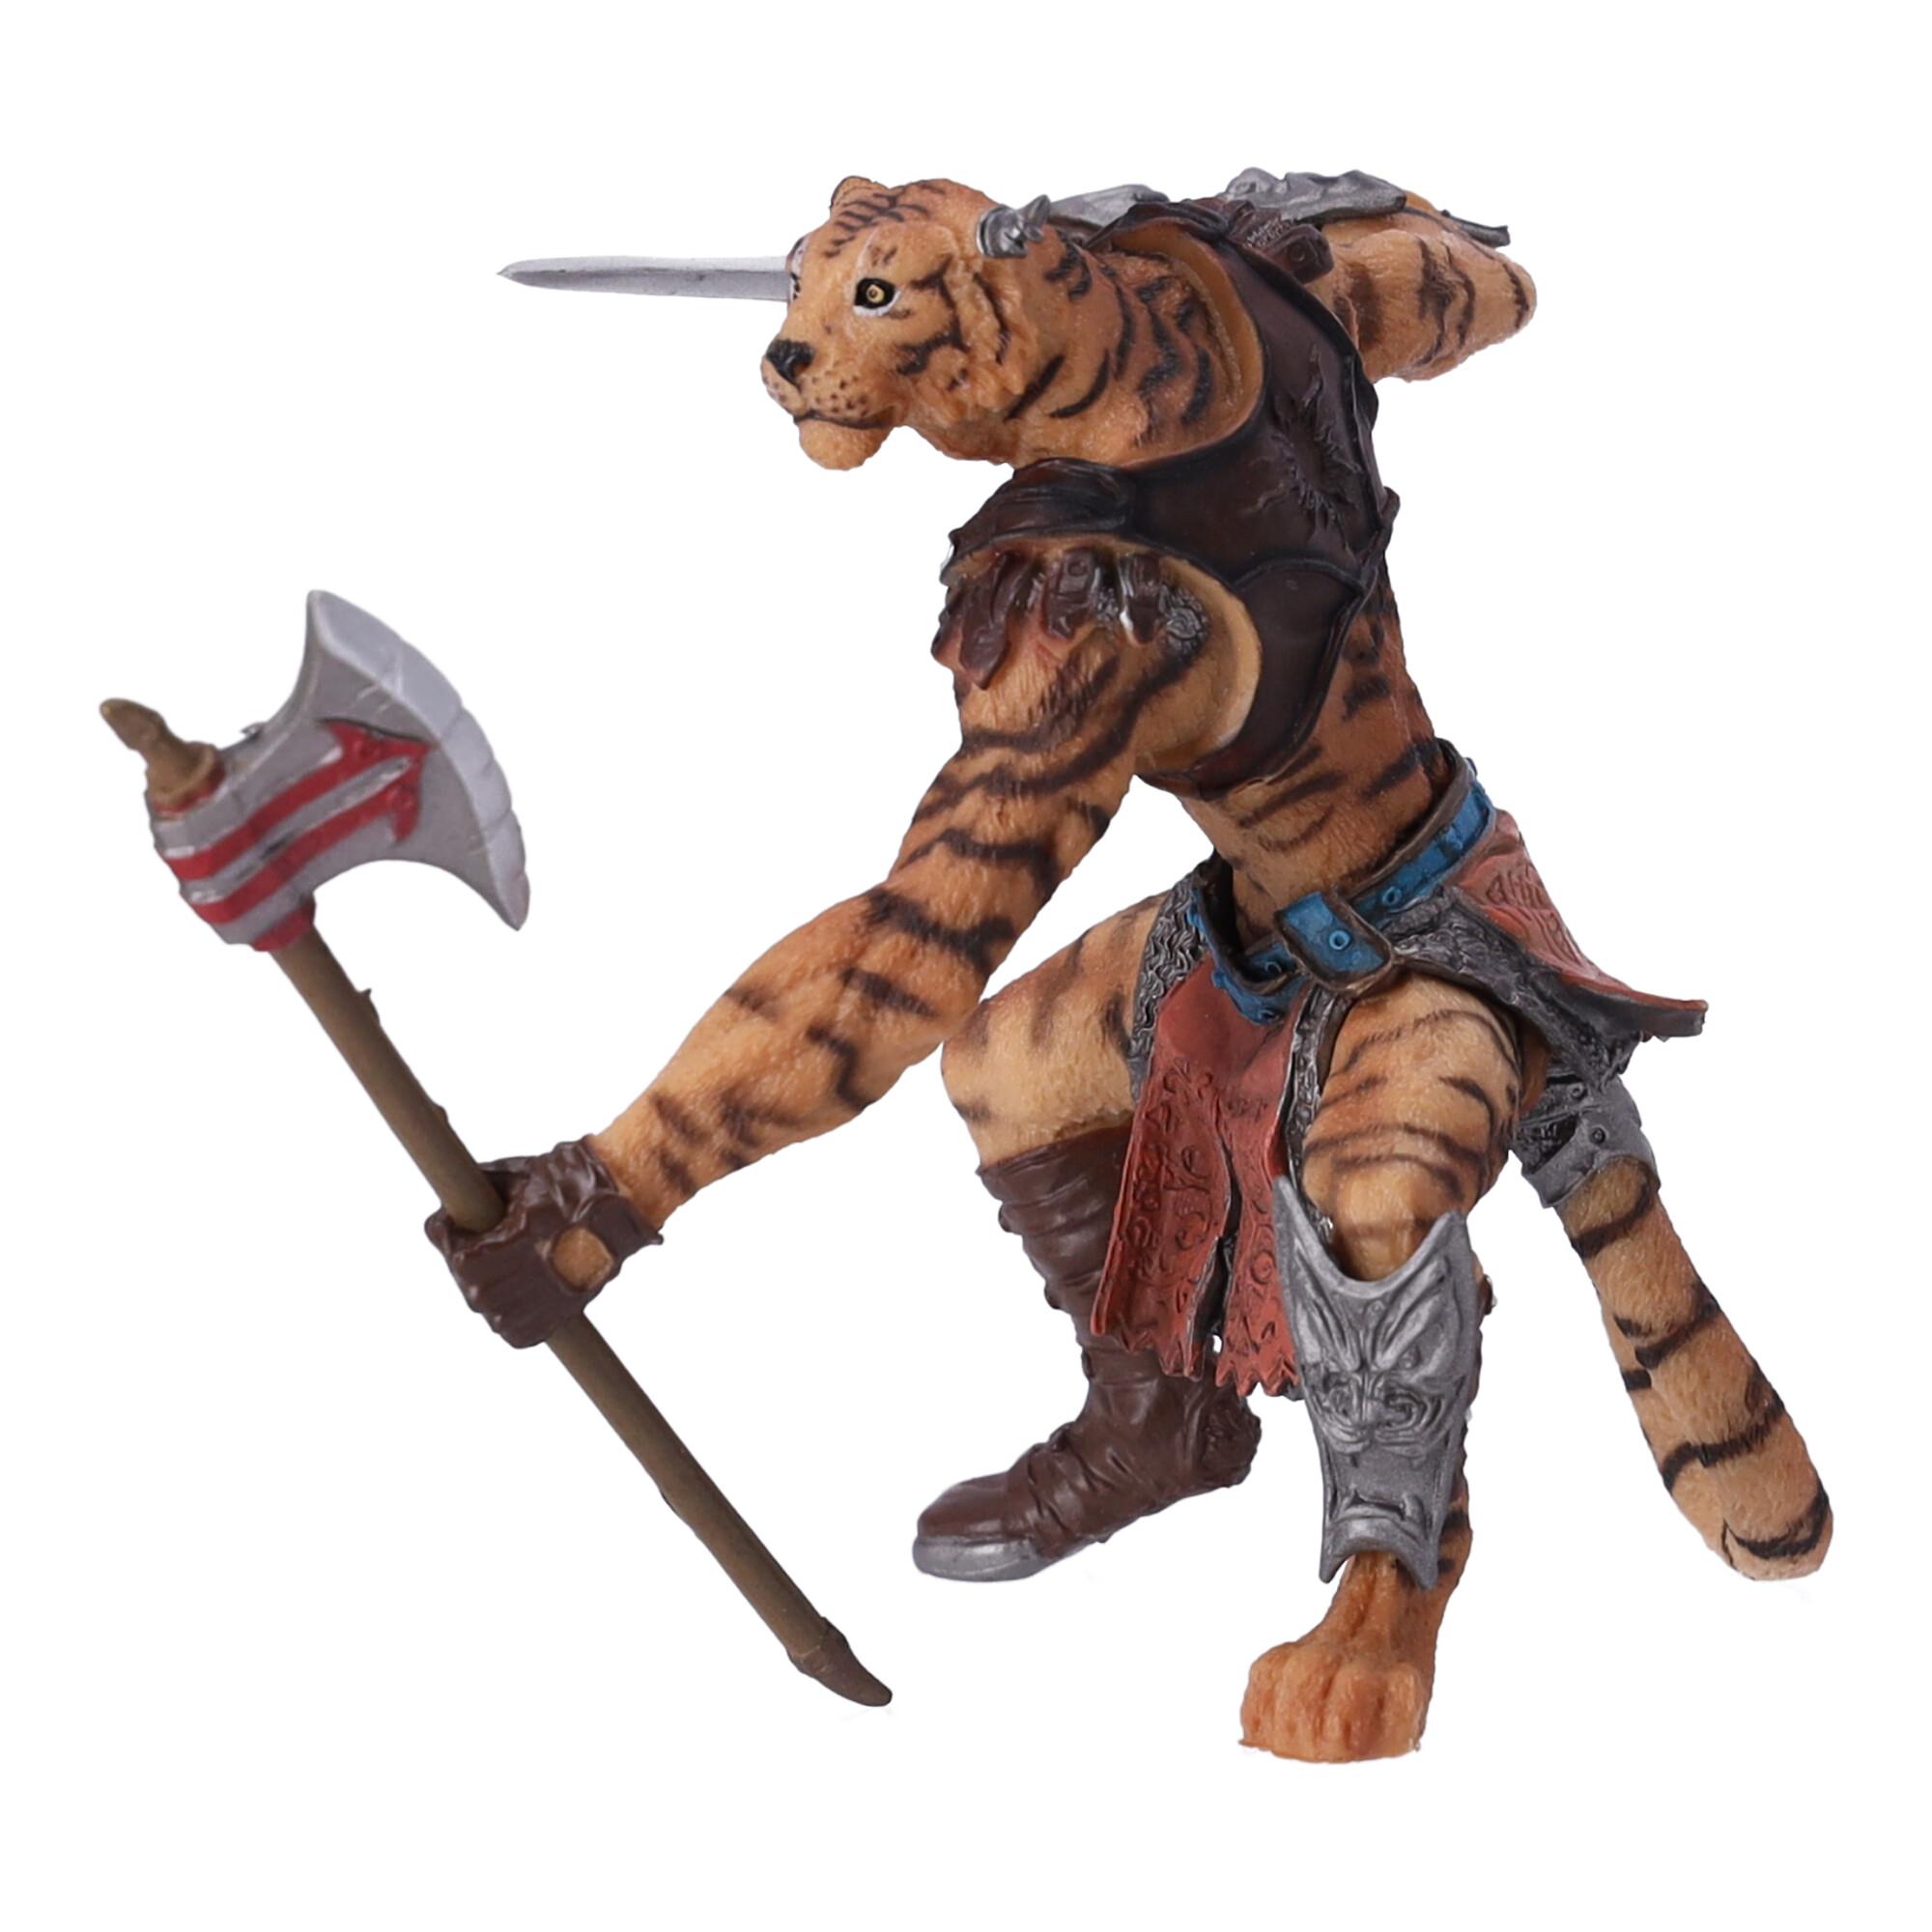 Collectible figurine Mutant tiger, Papo